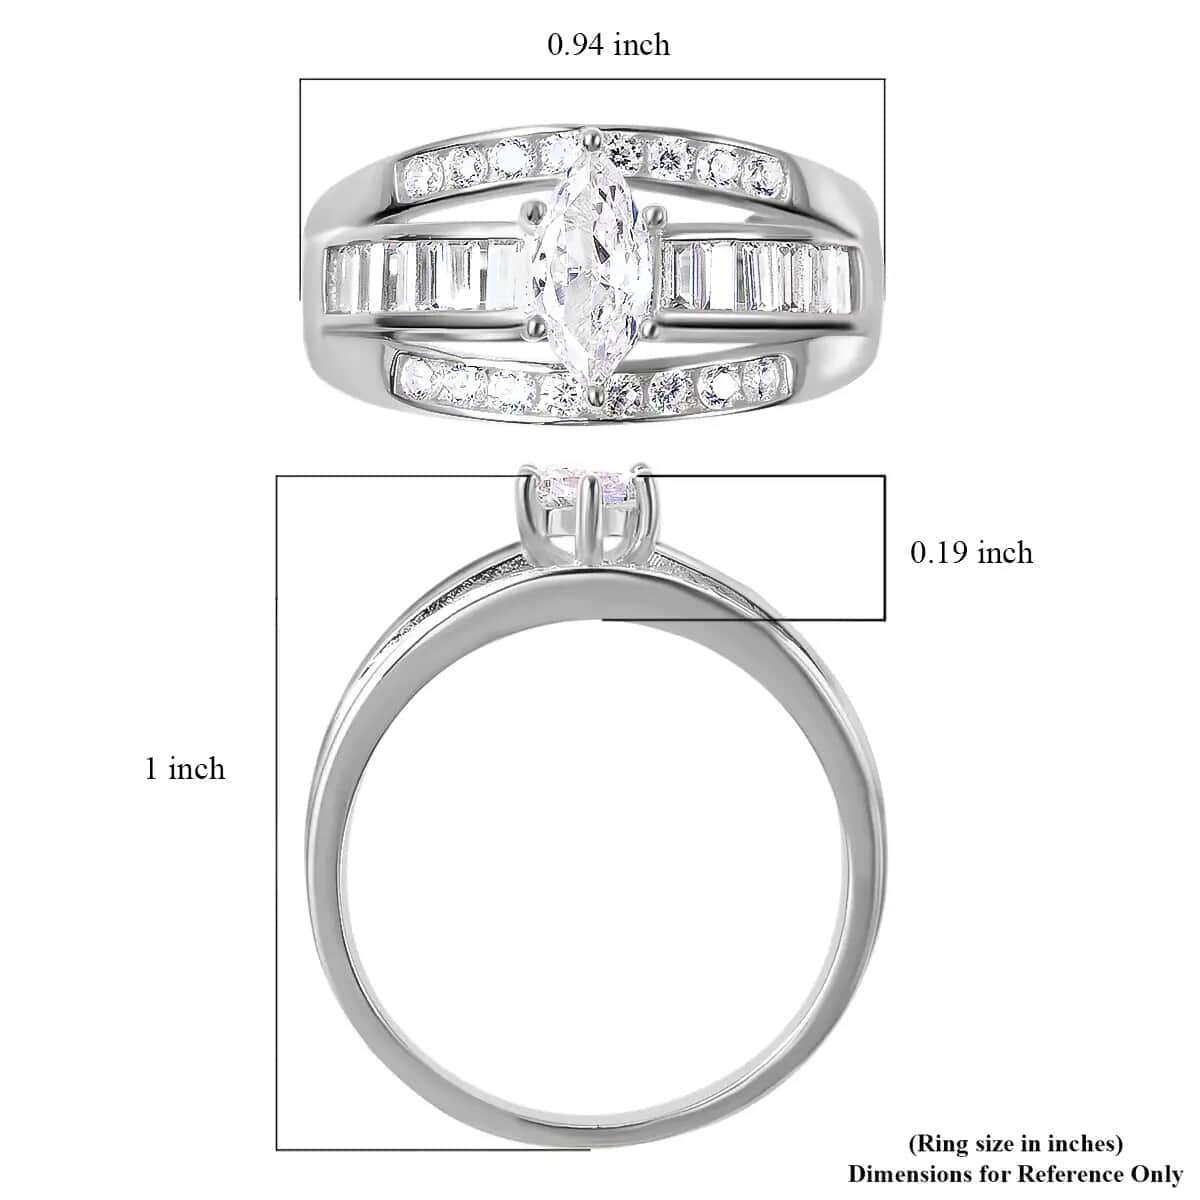 Buy Simulated Diamond Band Ring in Sterling Silver, Three Row